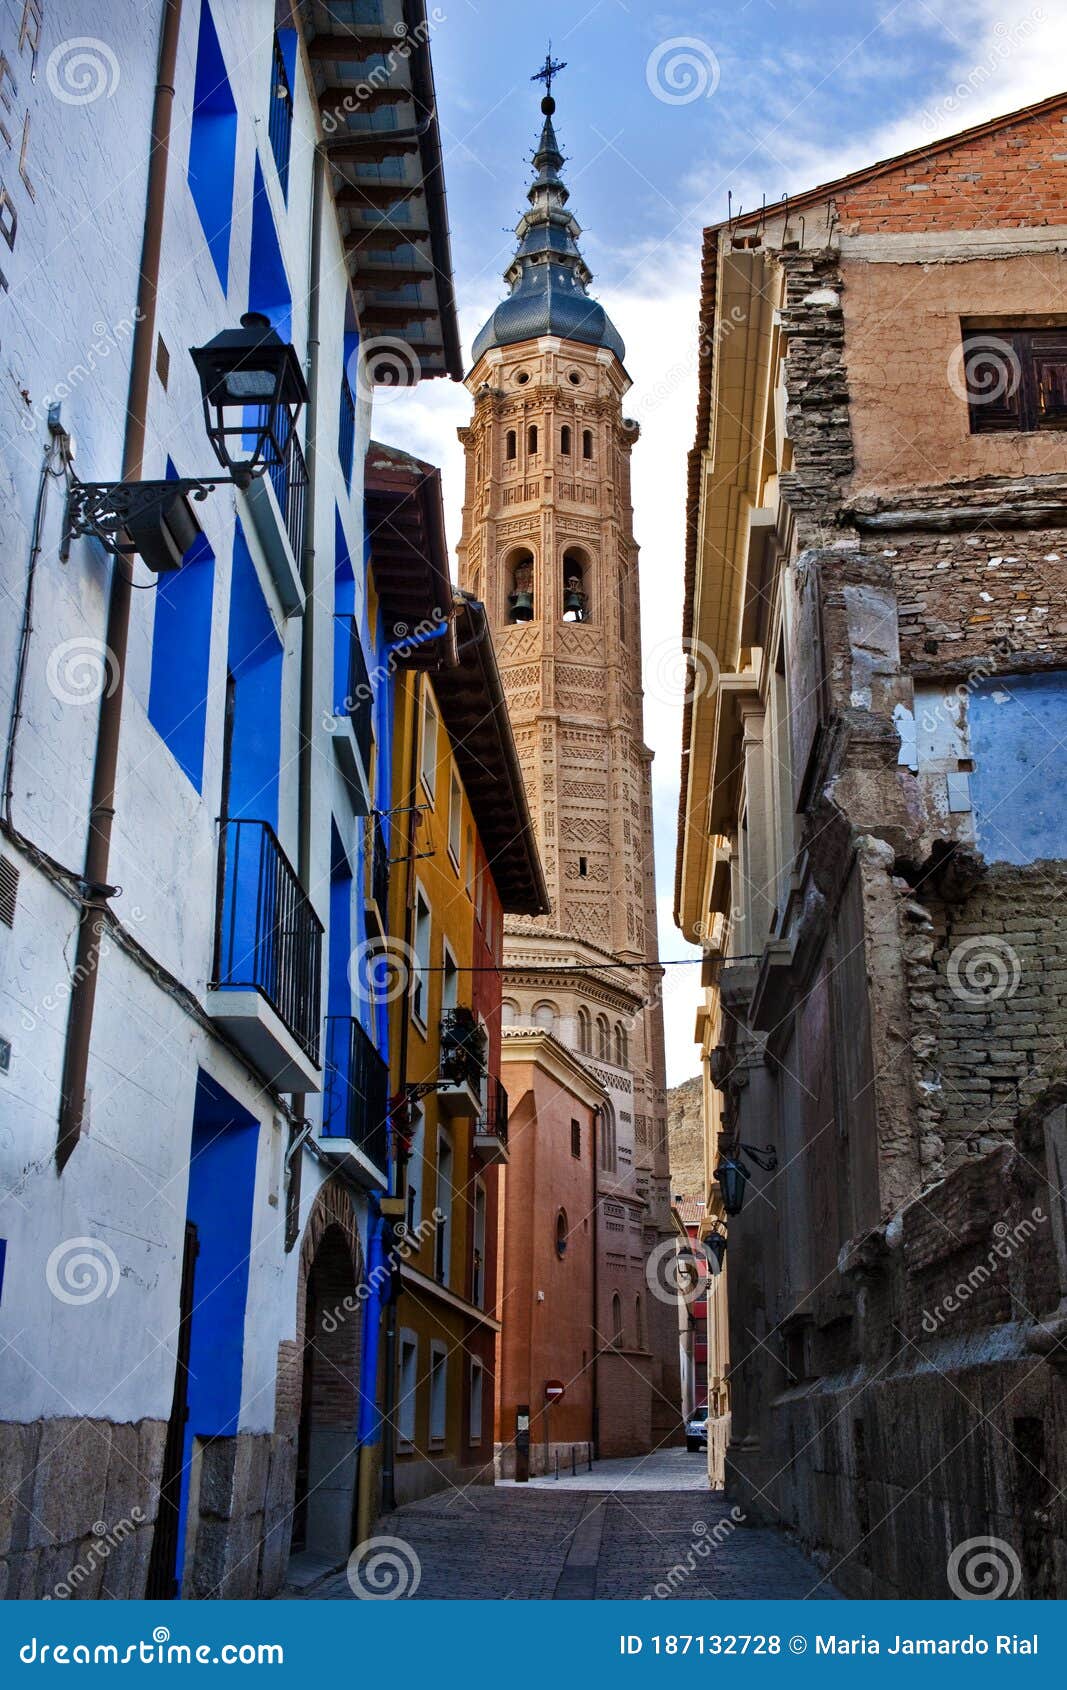 a street of the town of calatayud, and in the background you can see one of the highest muderes towers